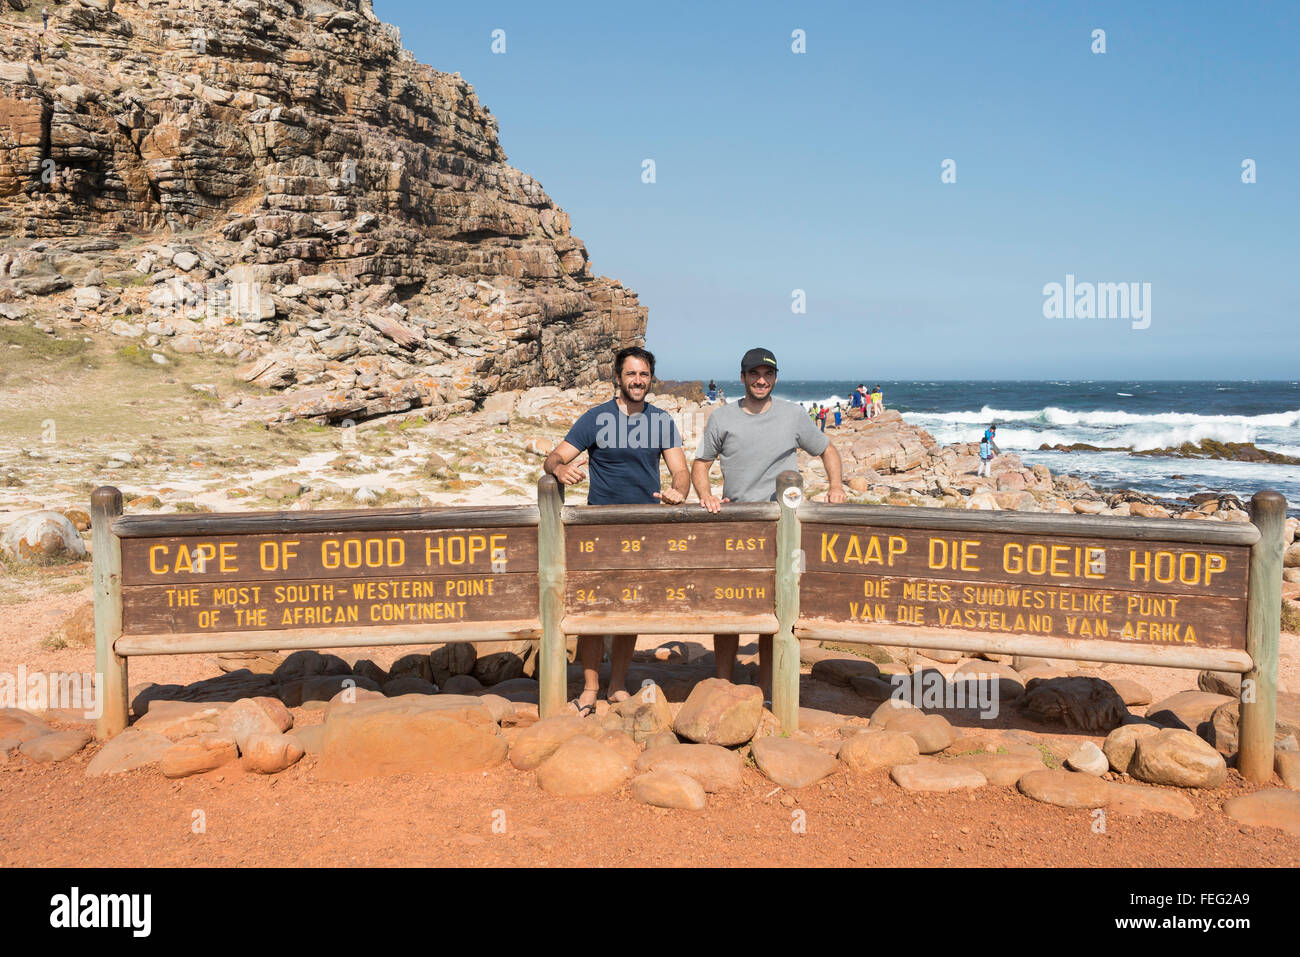 Male tourists by Cape of Good Hope sign, Cape Peninsula, City of Cape Town, Western Cape Province, Republic of South Africa Stock Photo